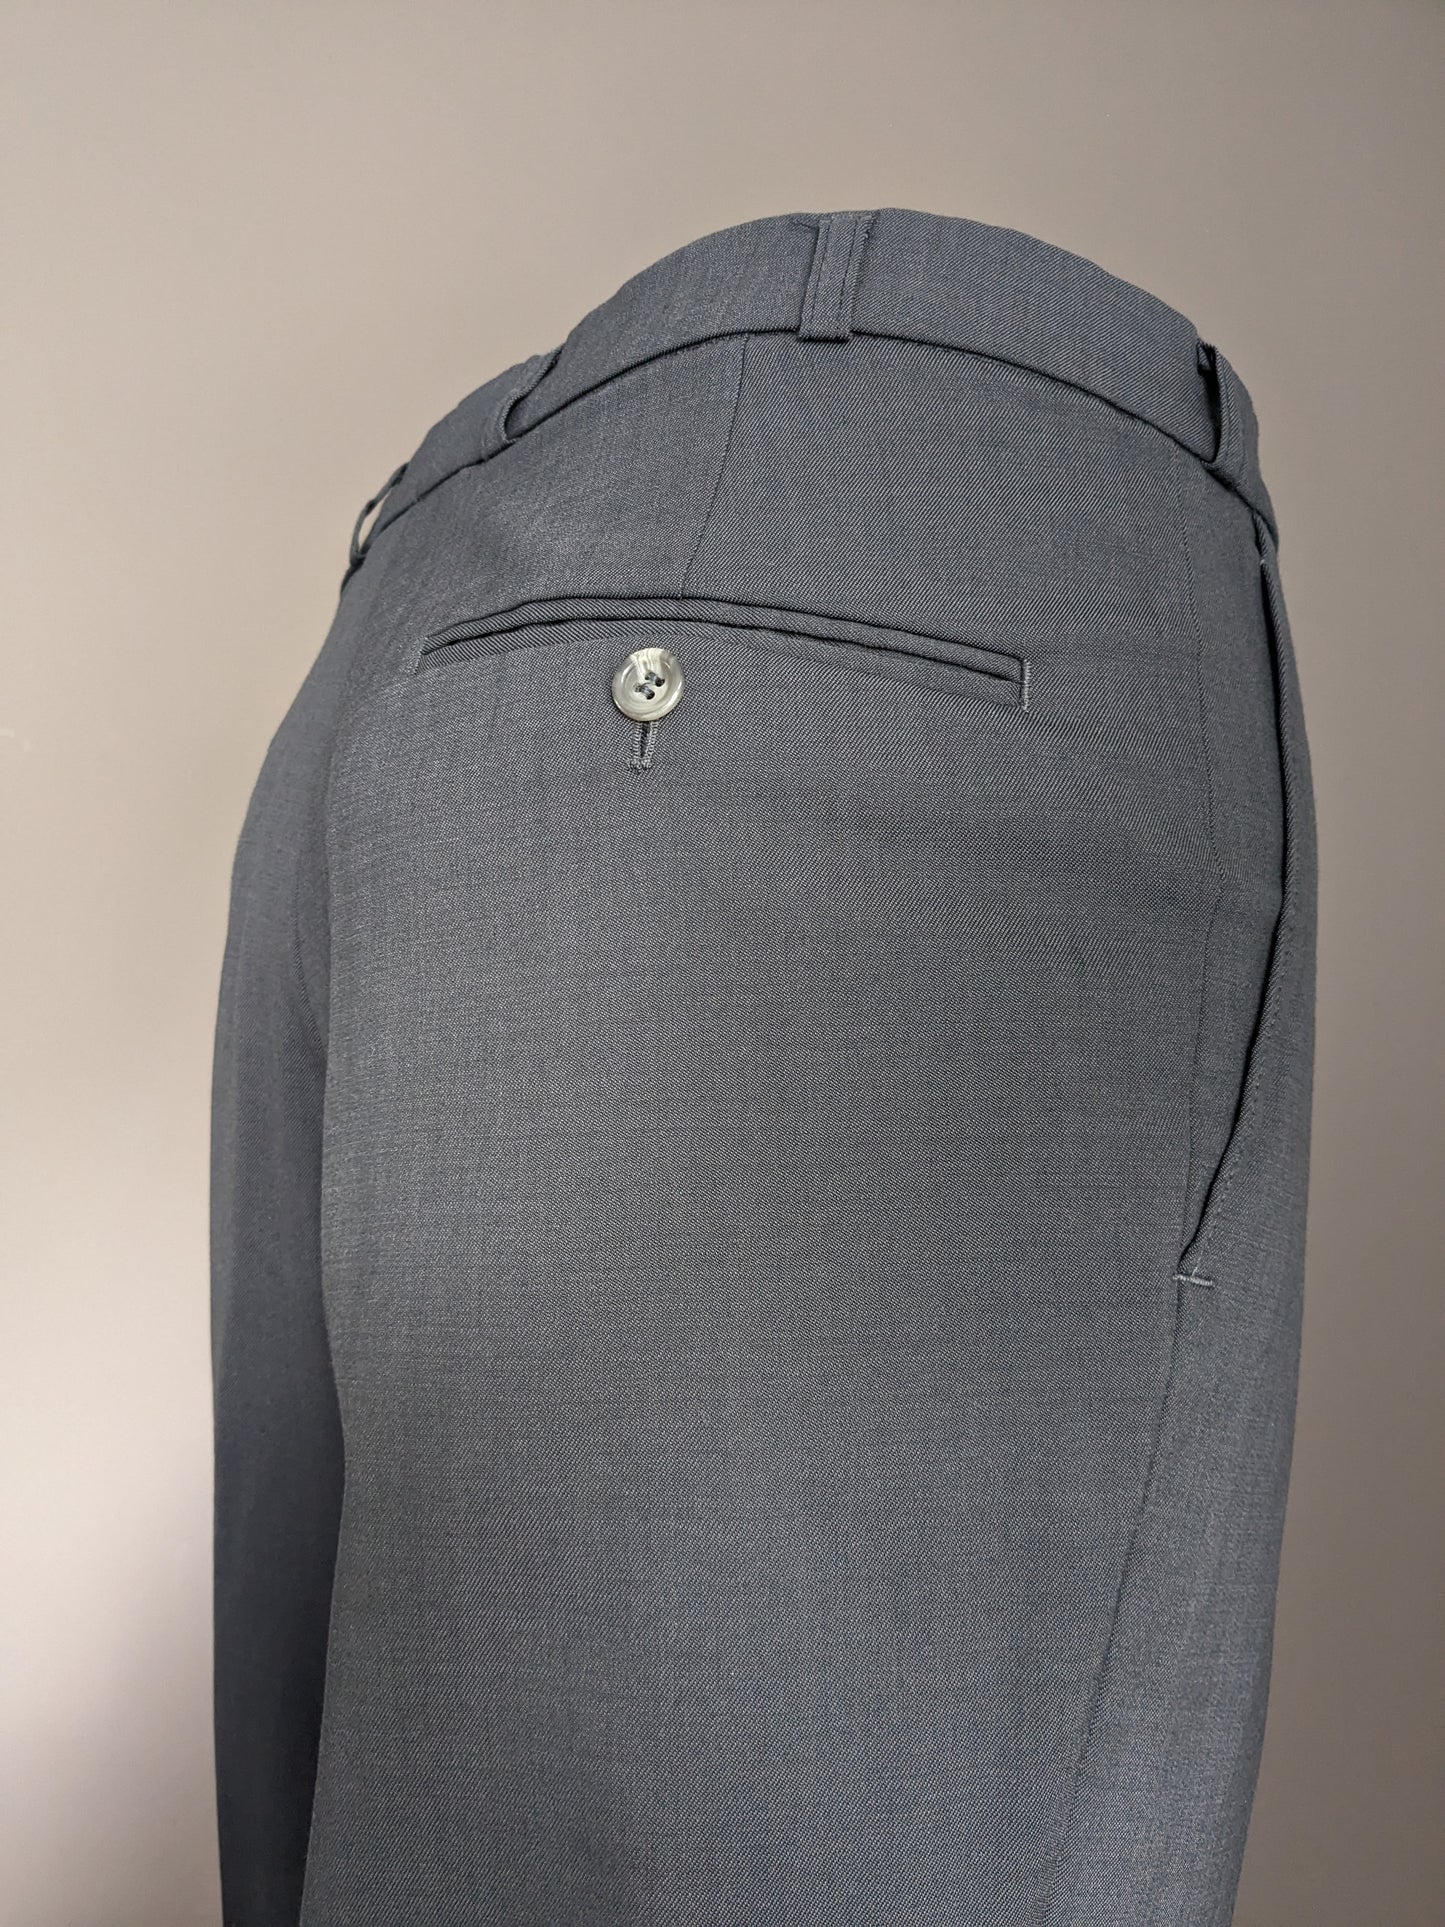 Mobil elasto trousers with cover. Dark gray motif. Size 52 / L.